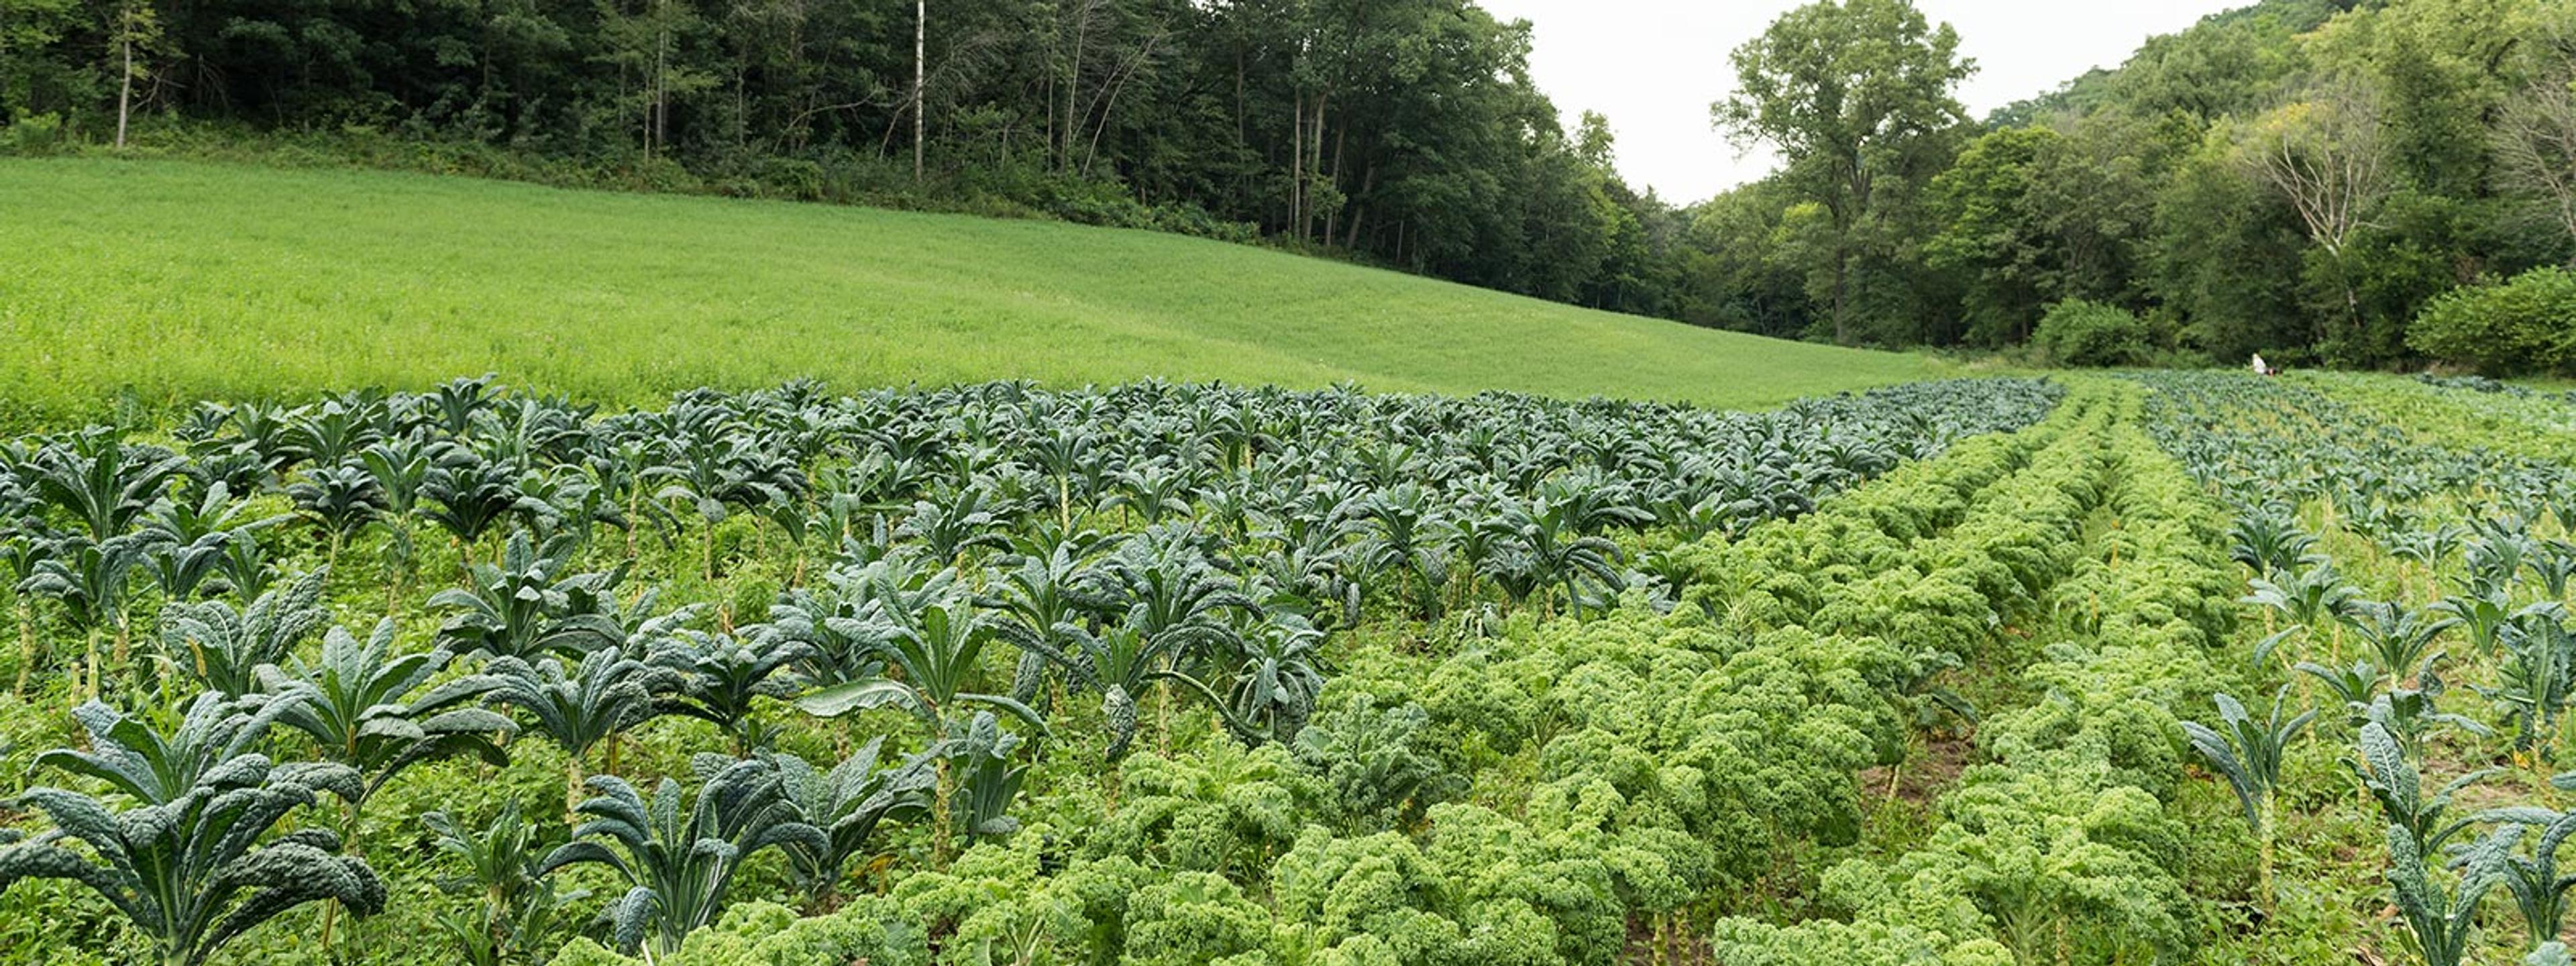 Rows of two types of organic kale next to a field of hay and trees